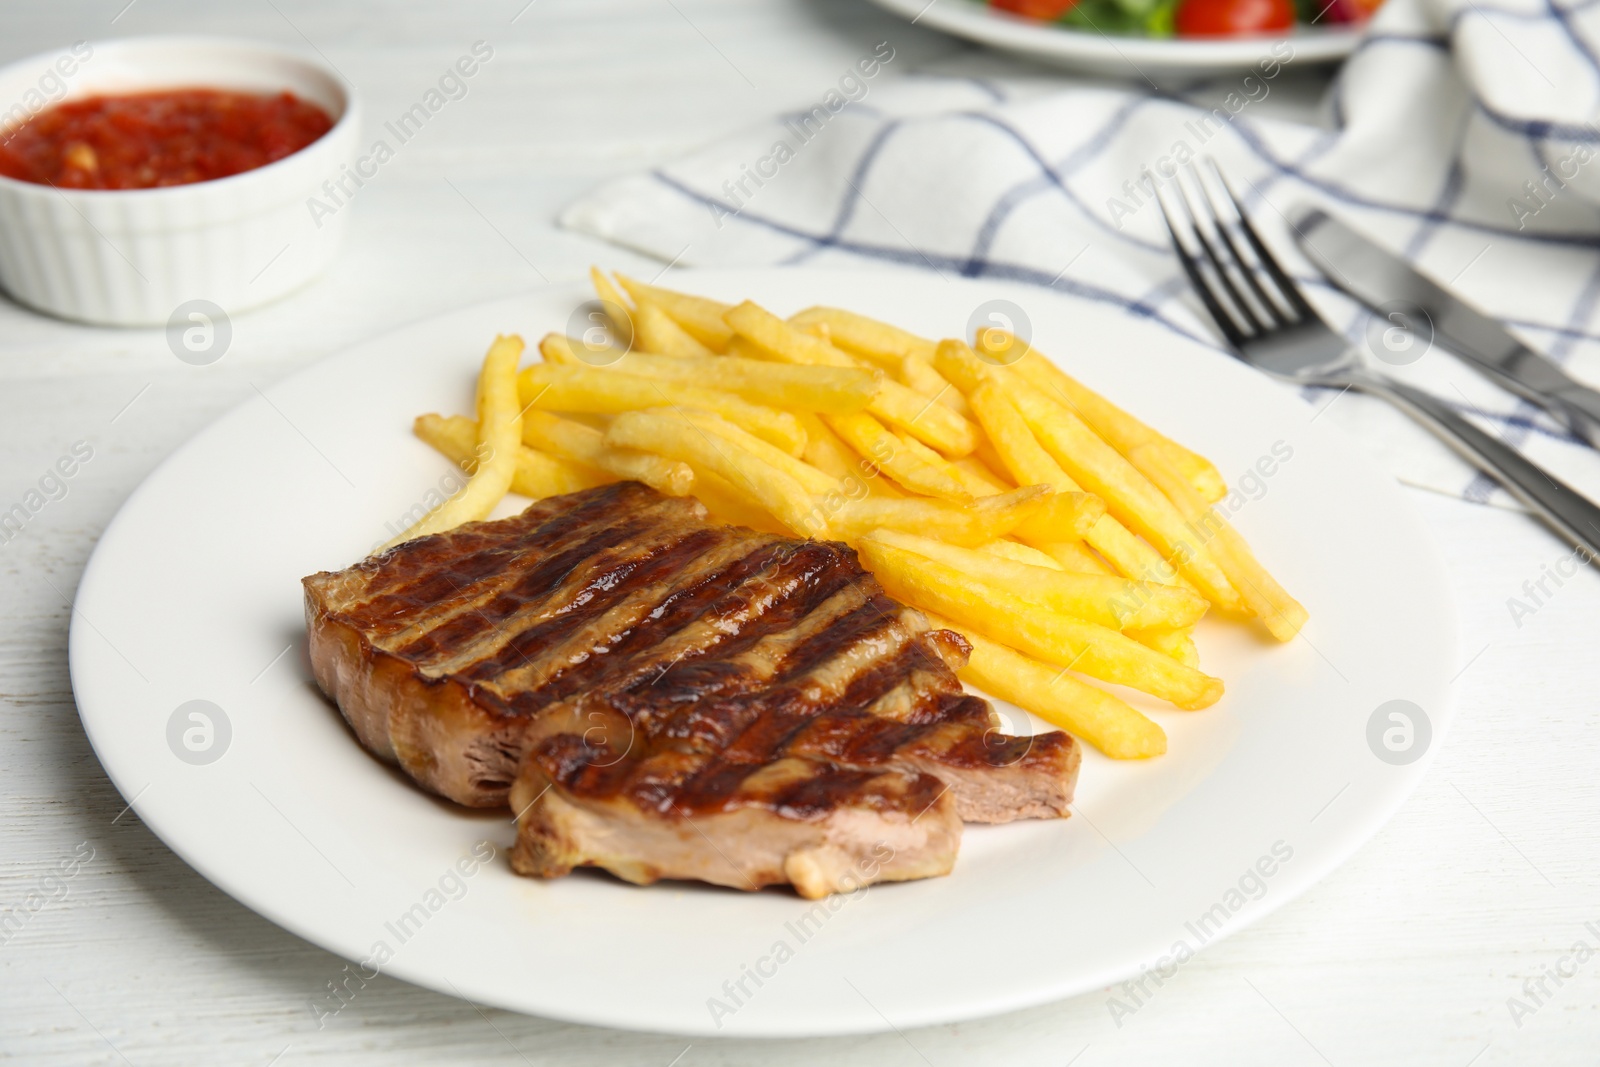 Photo of Tasty grilled beef steak and French fries on white wooden table